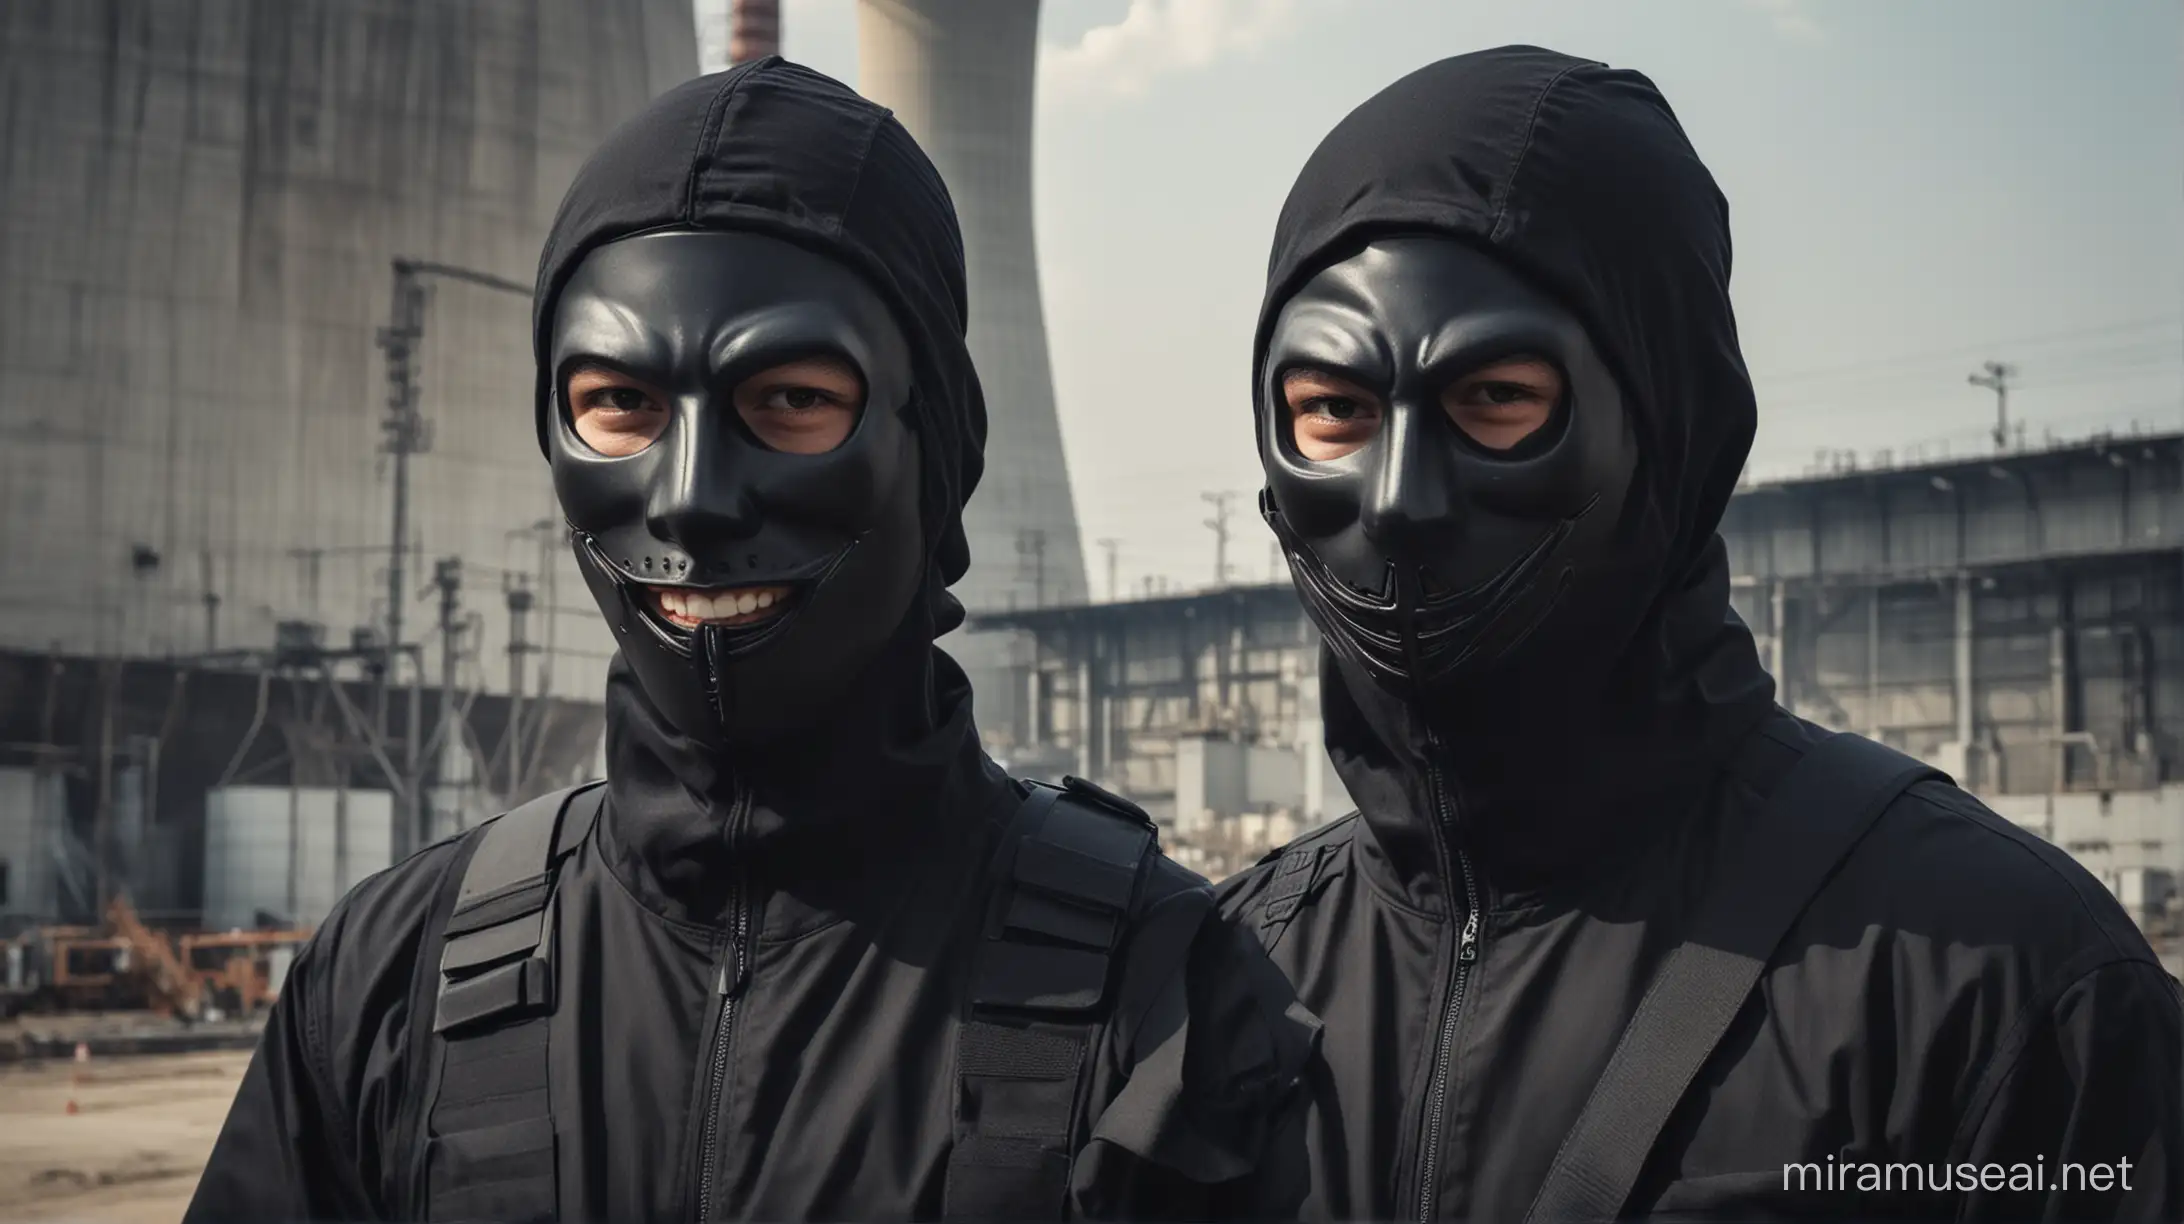 a black suit thief wear black mask go to Nuclear power factory to steal the nuclear code, thief been punched in the face by swat security when smiling, 